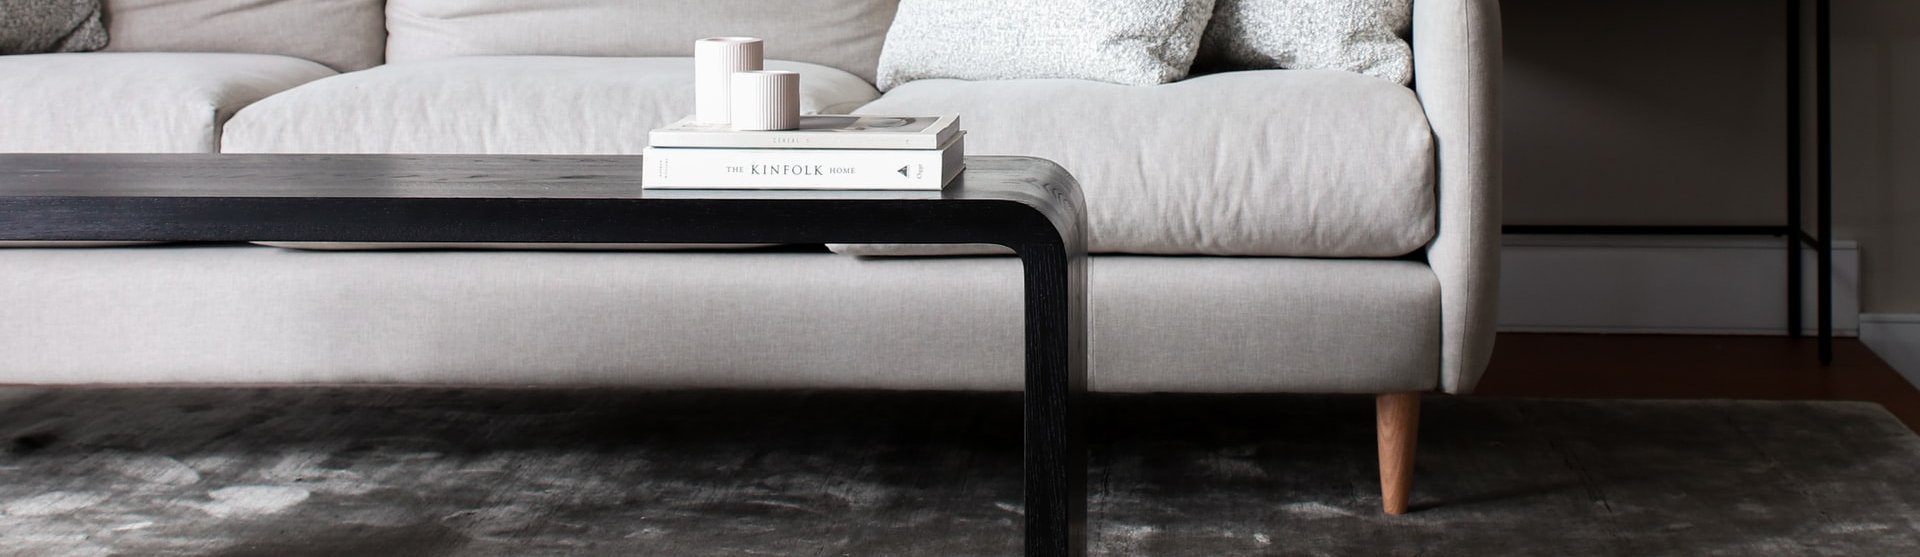 white couch and black coffee table on a brown hardwood floor from Johnson & Sons Flooring in Knoxville, TN